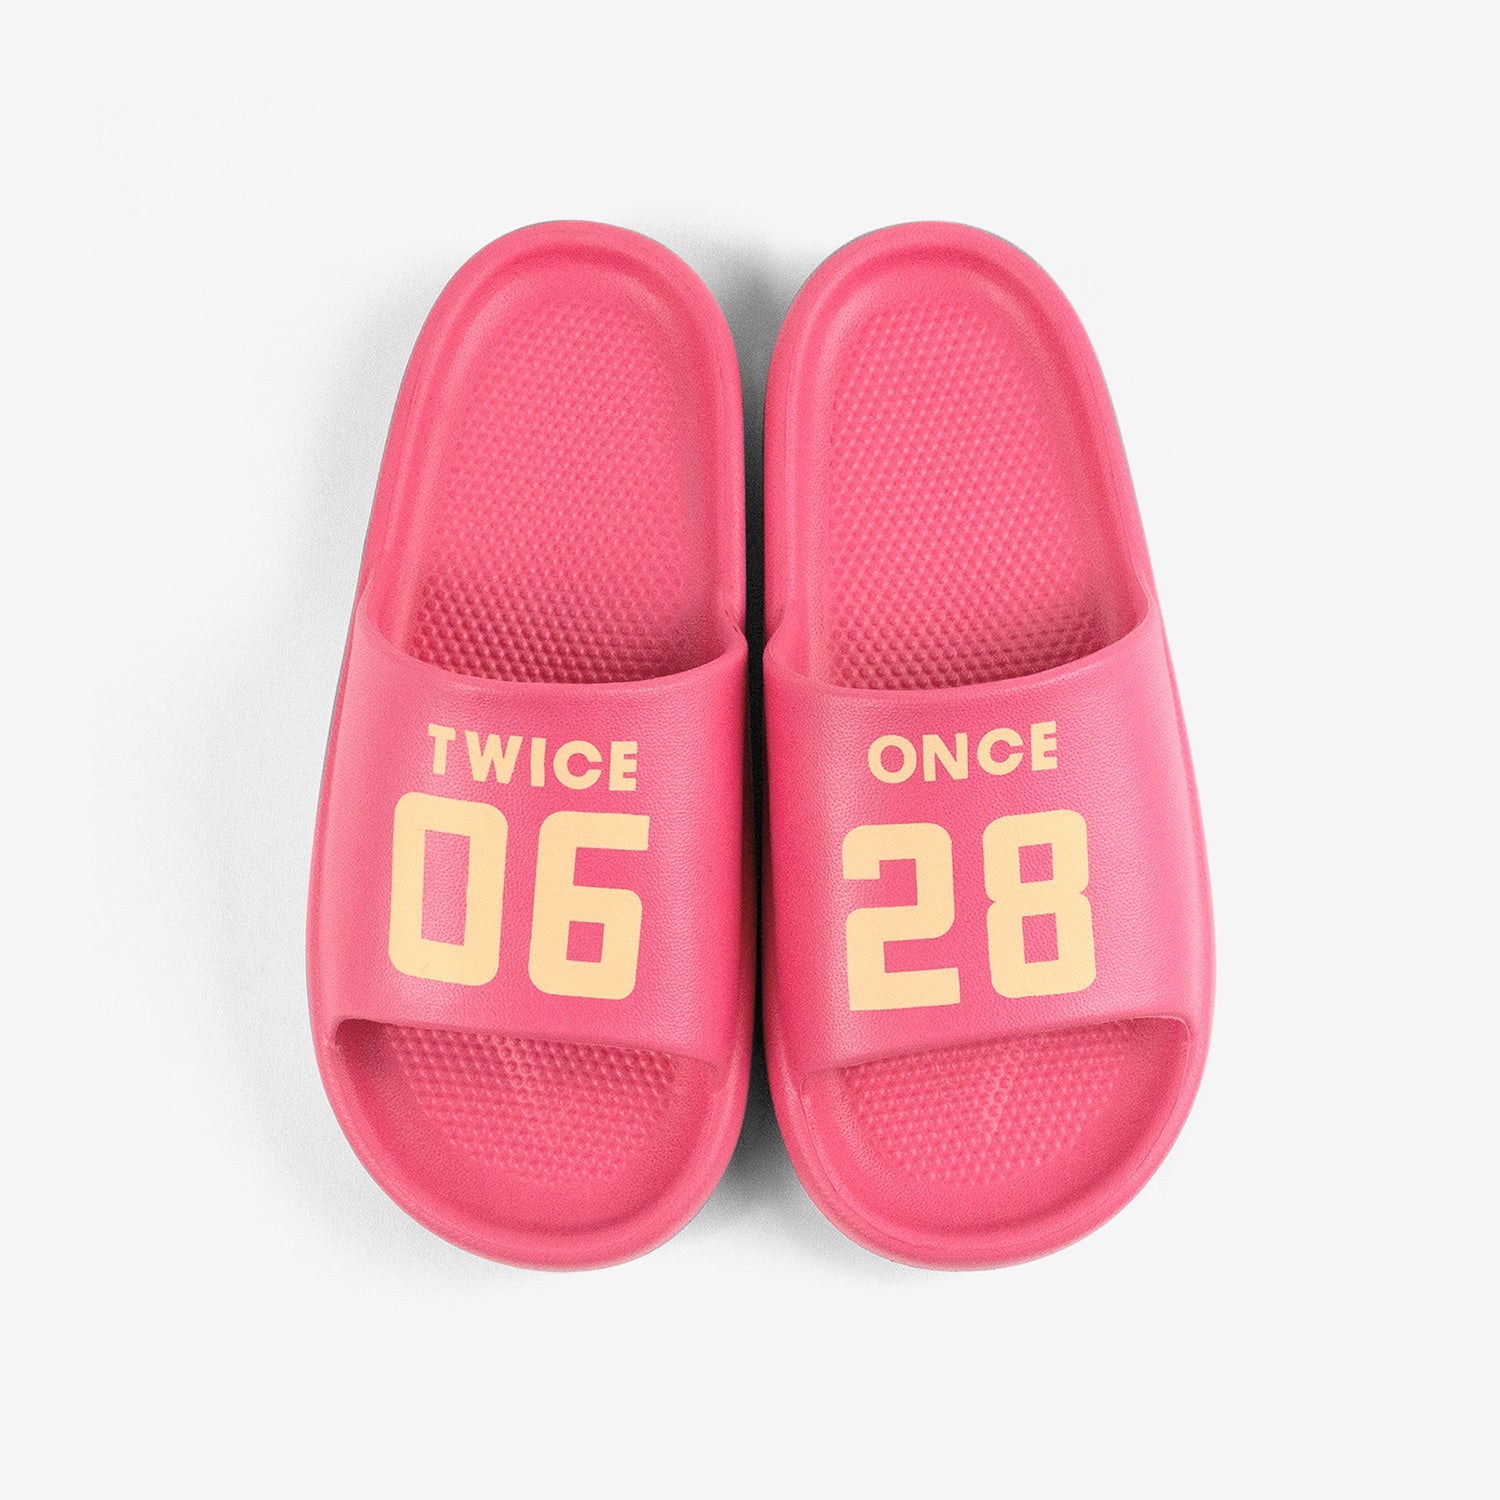 SHOWER SANDALS【LADIES】 / TWICE『READY TO BE』